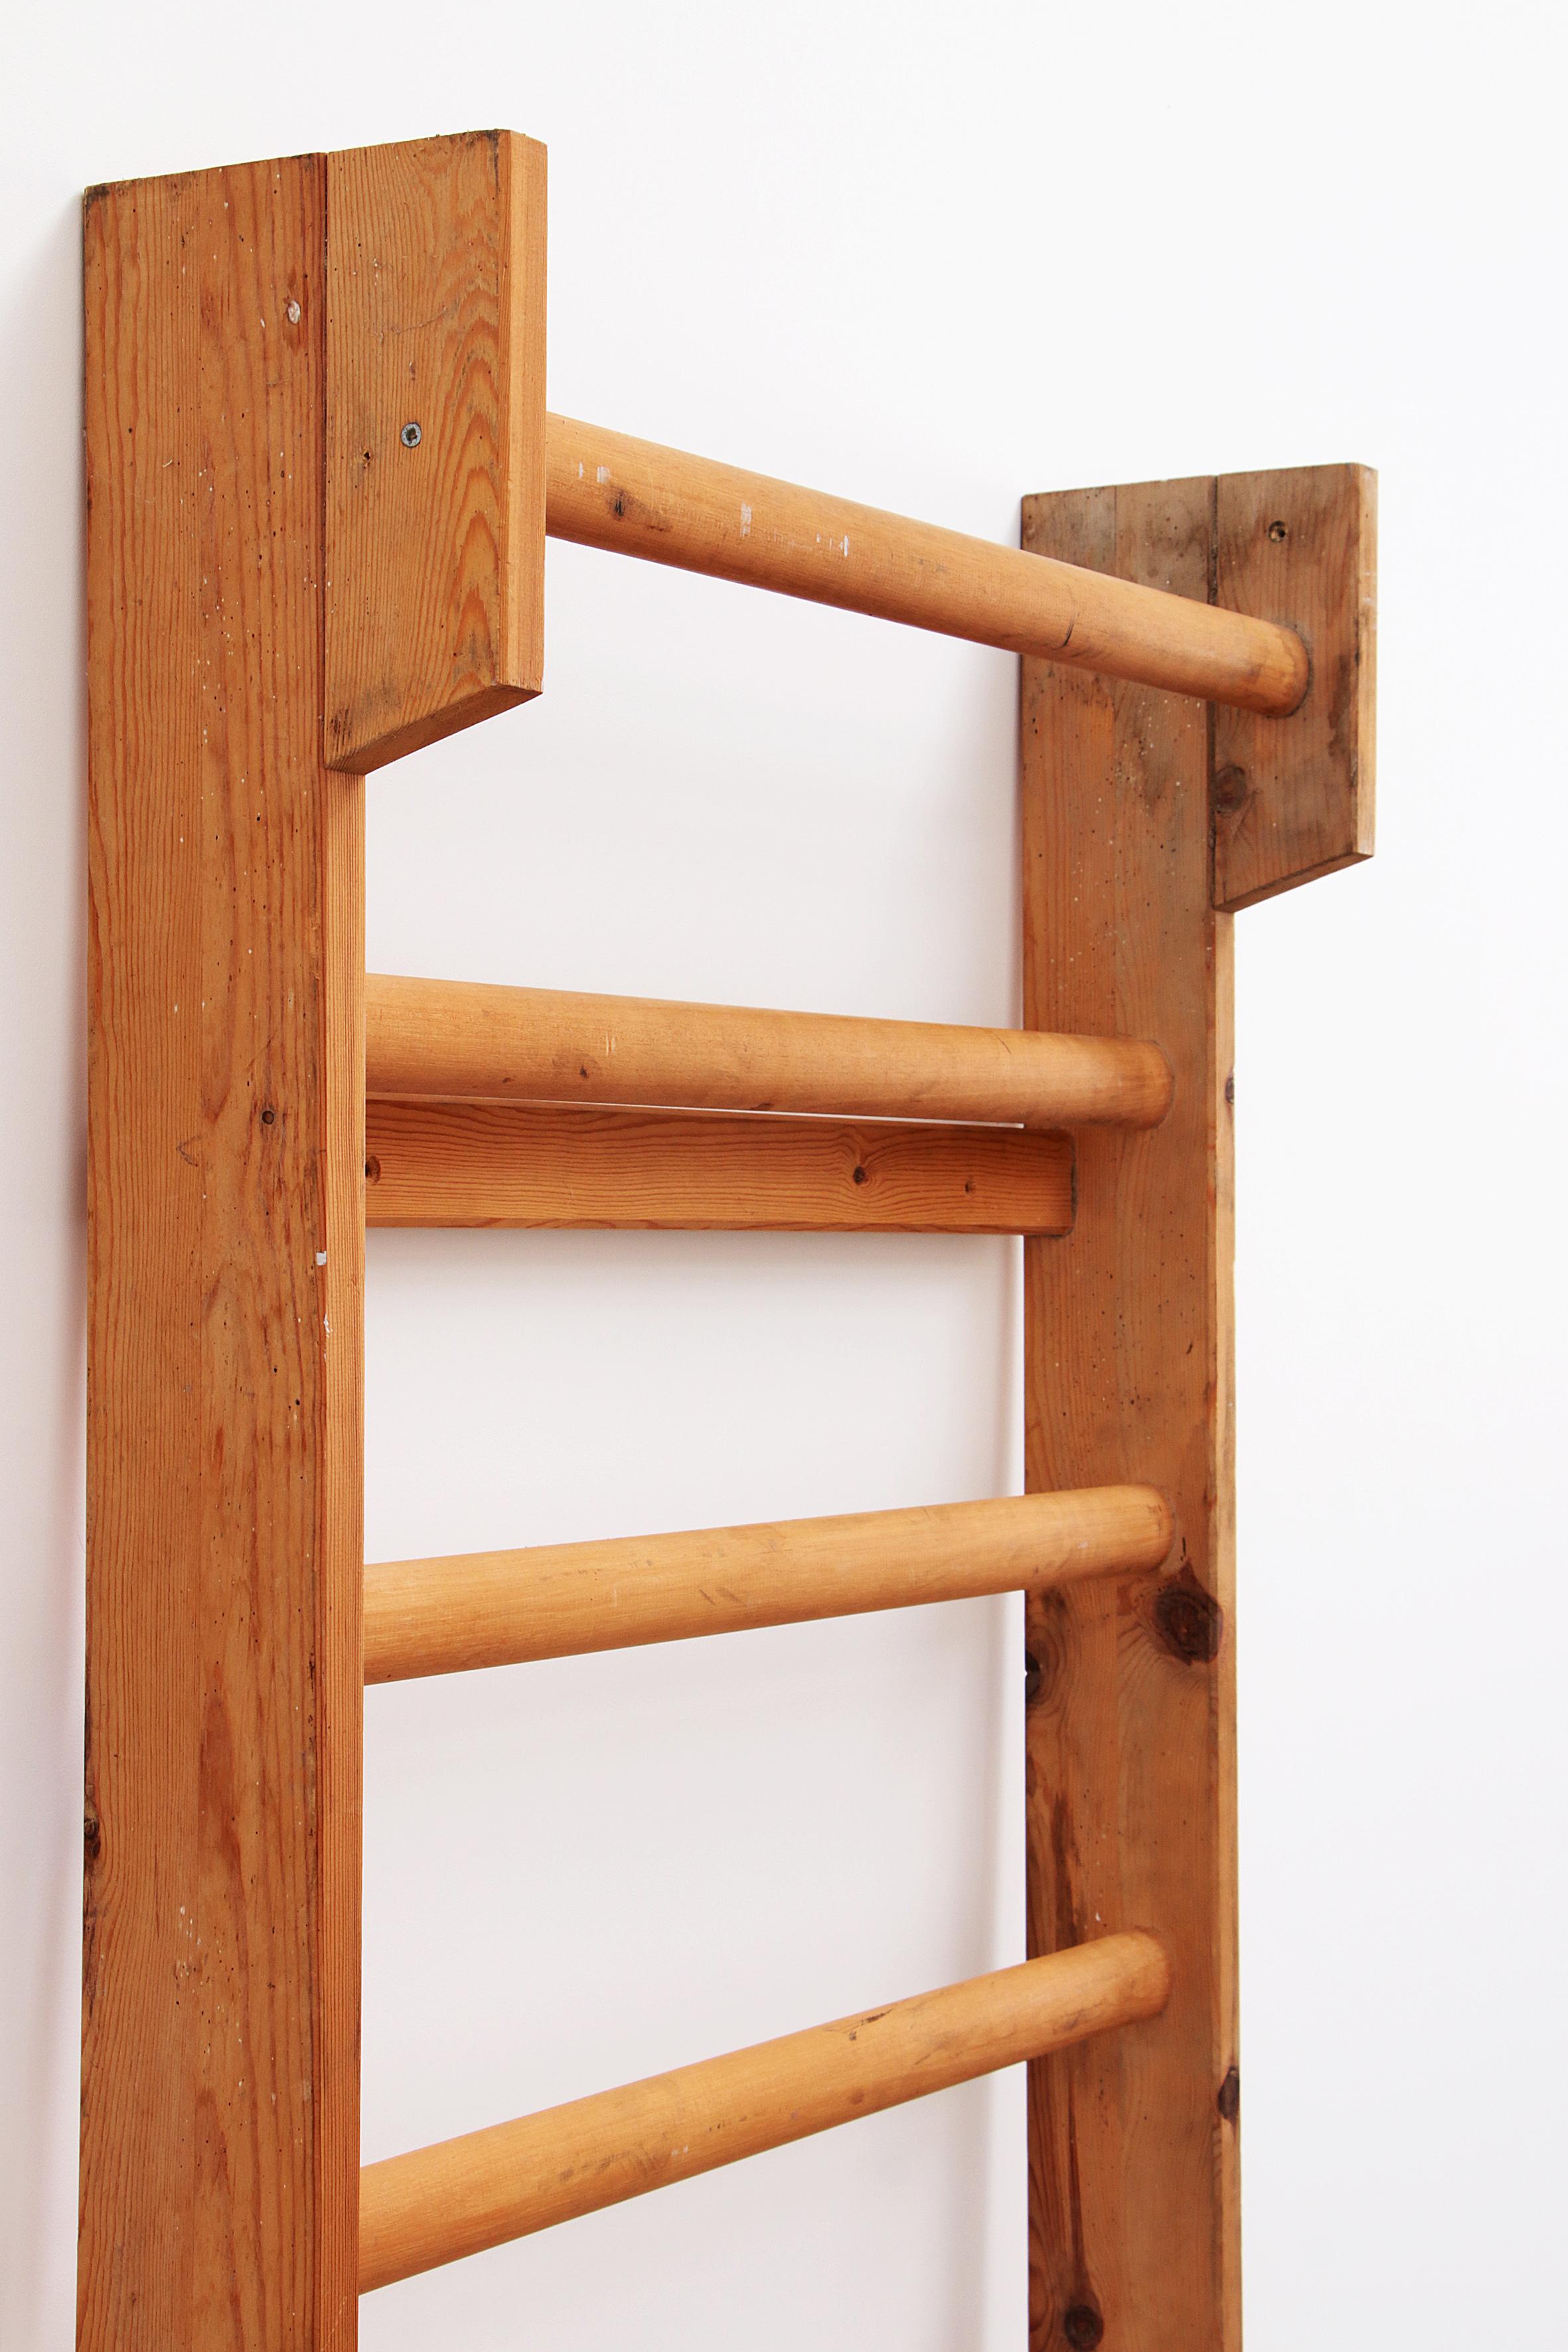 Swedish Old wooden gym climbing frame or physio rack from the 1960s, top vintage